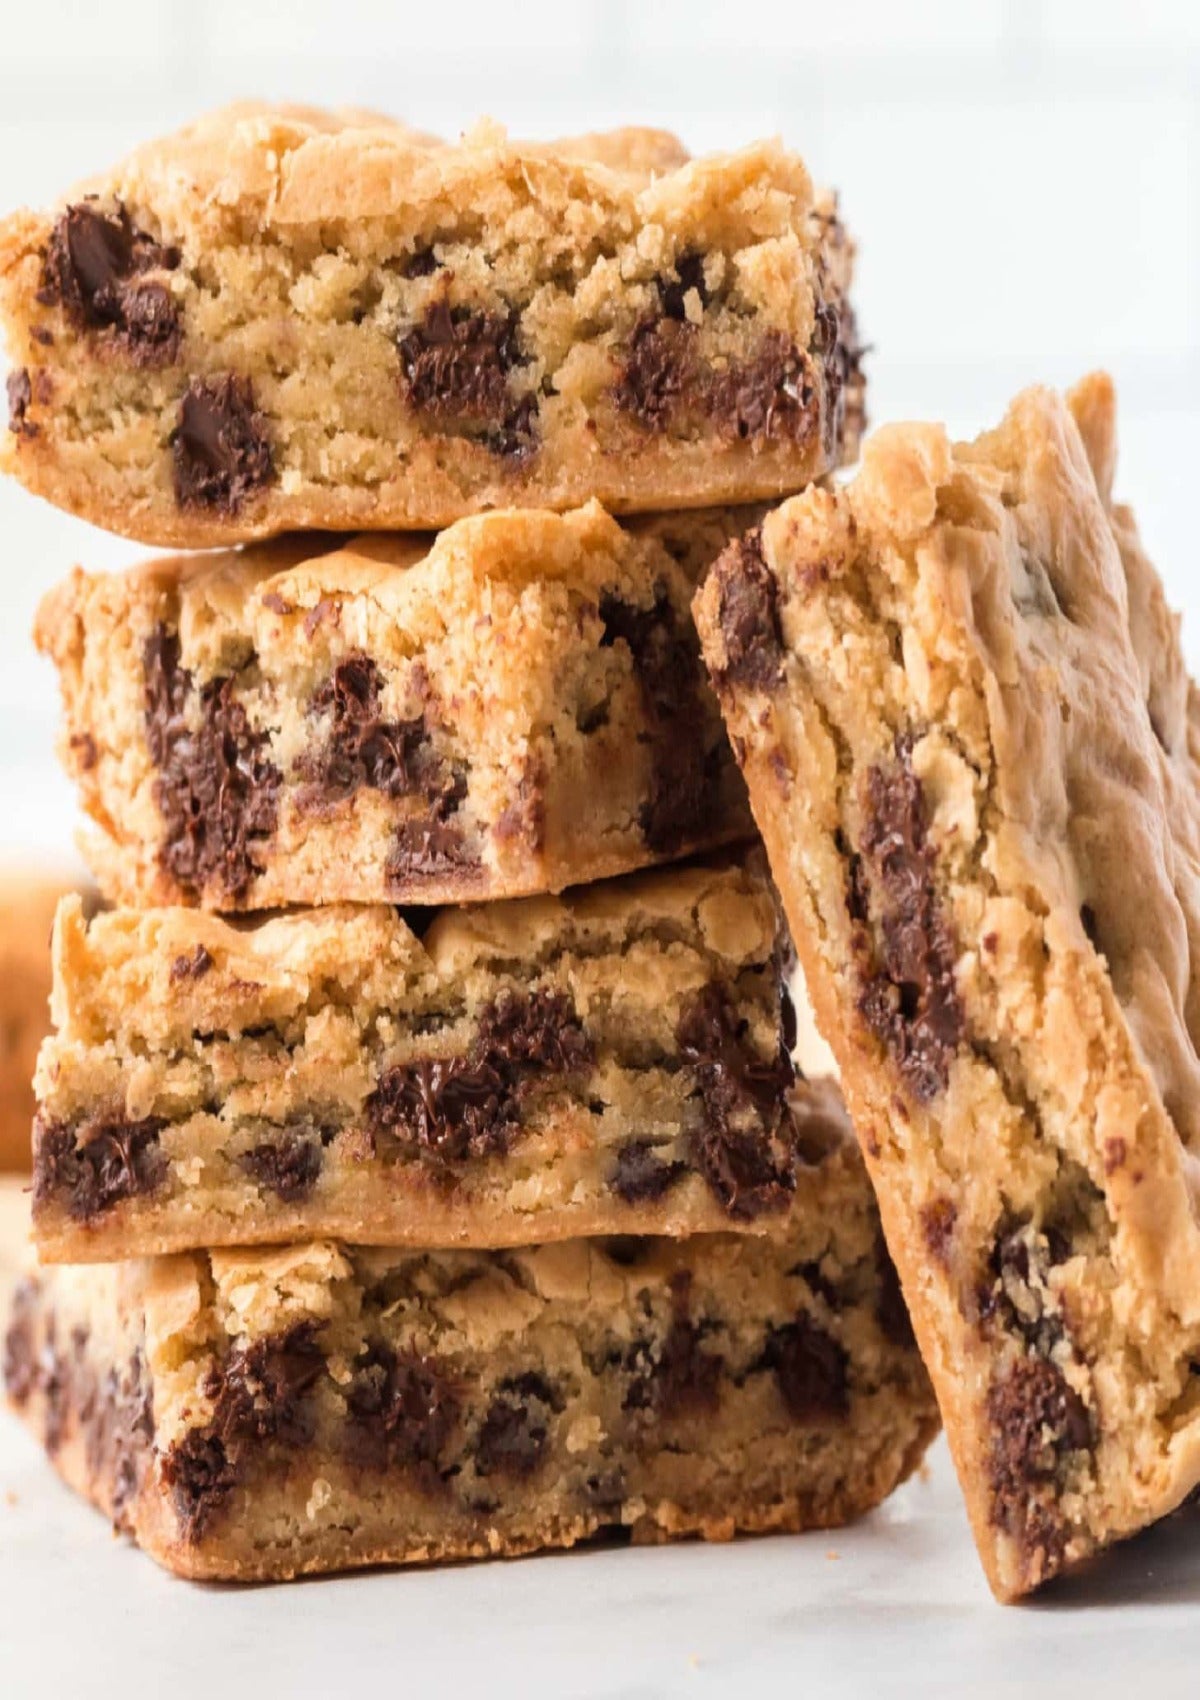 The Chewy Chocolate Chip Gourmet Cookie Bar